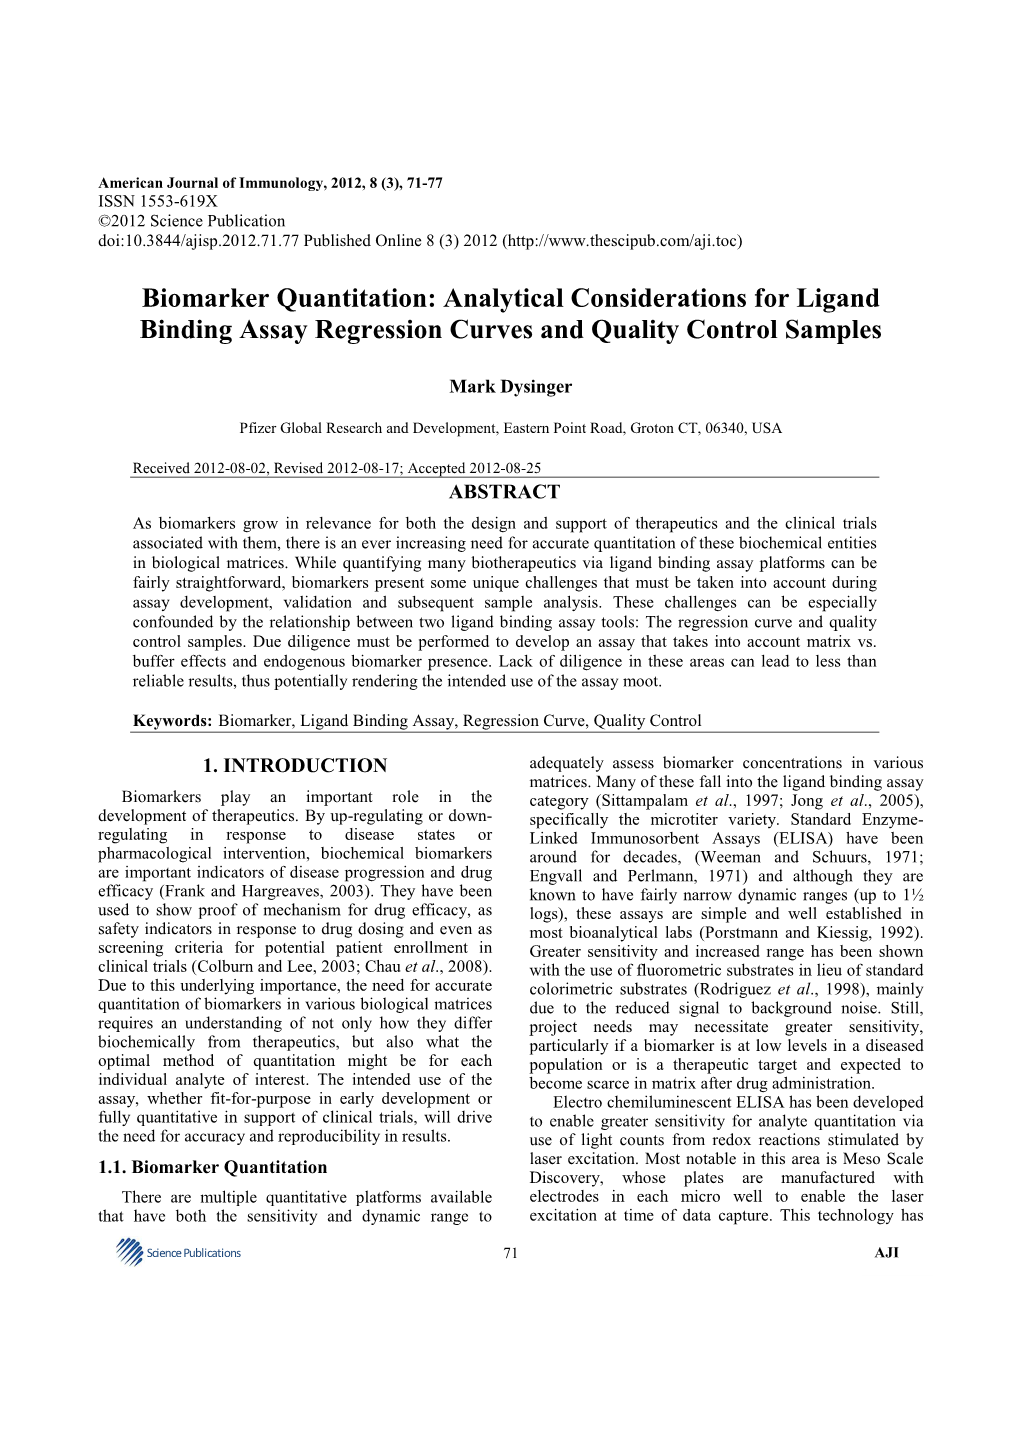 Analytical Considerations for Ligand Binding Assay Regression Curves and Quality Control Samples